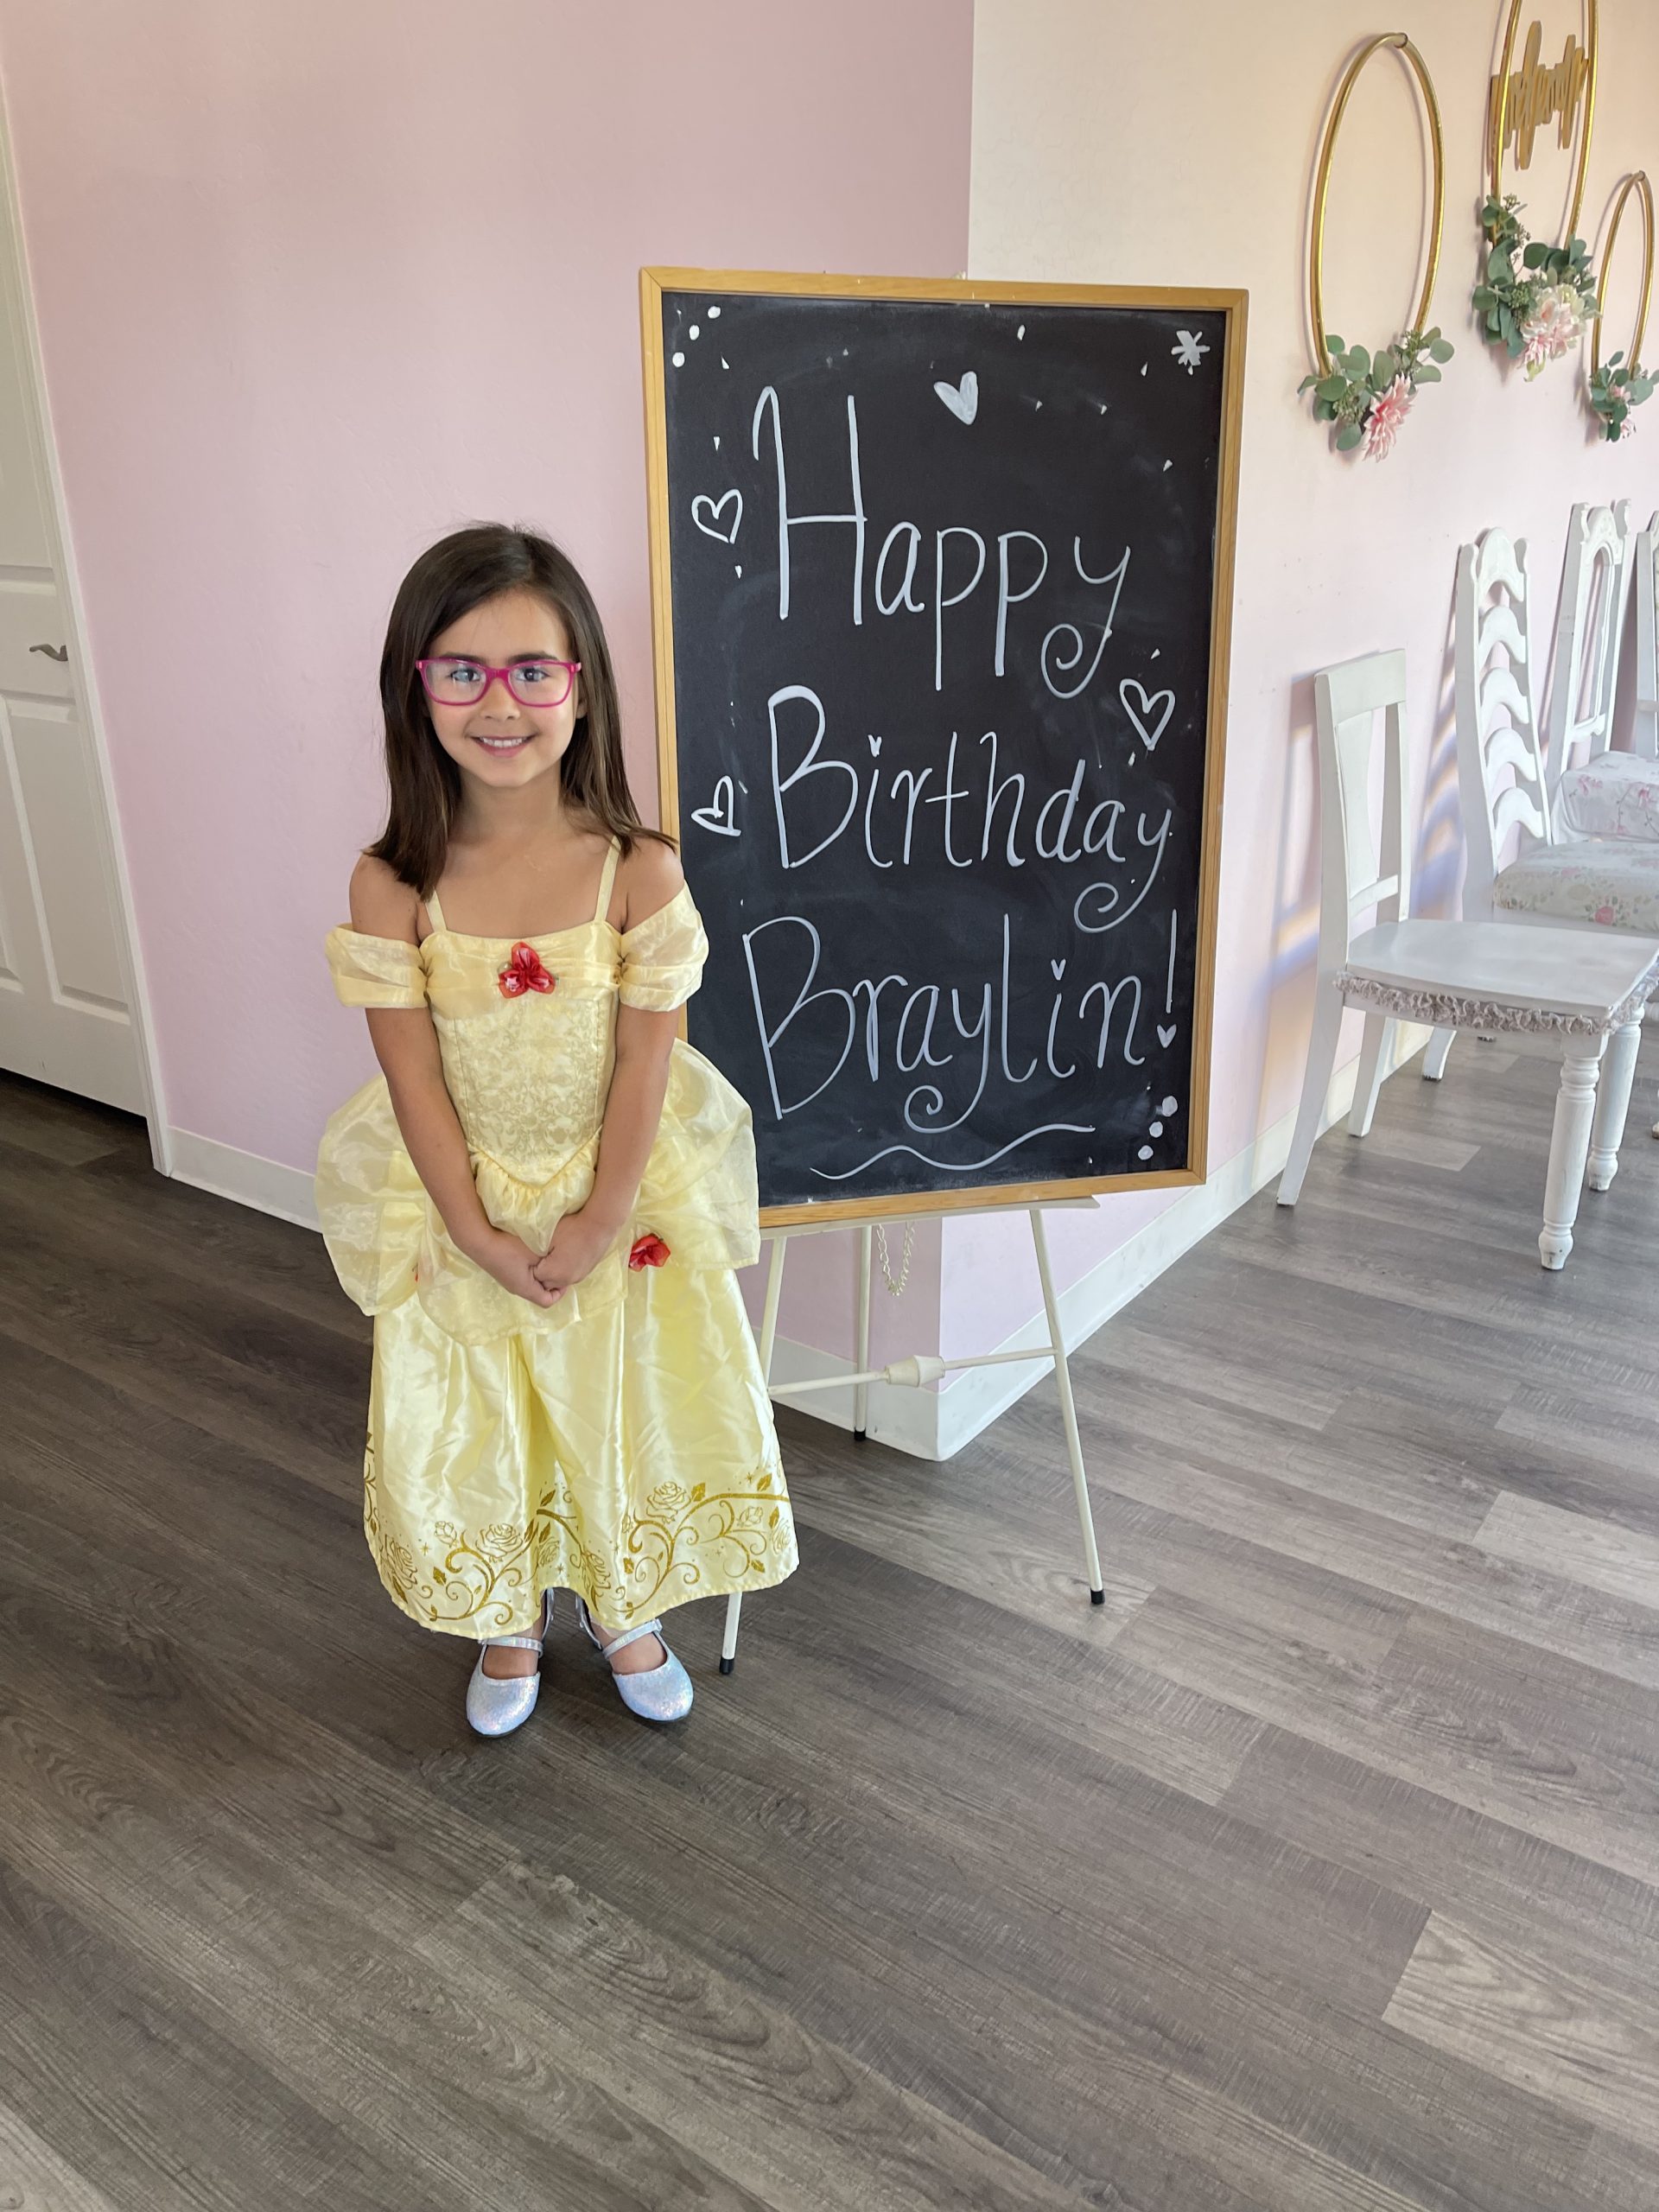 Little girl dressed up as Belle, standing next to a chalkboard sign that reads "Happy Birthday Braylin"